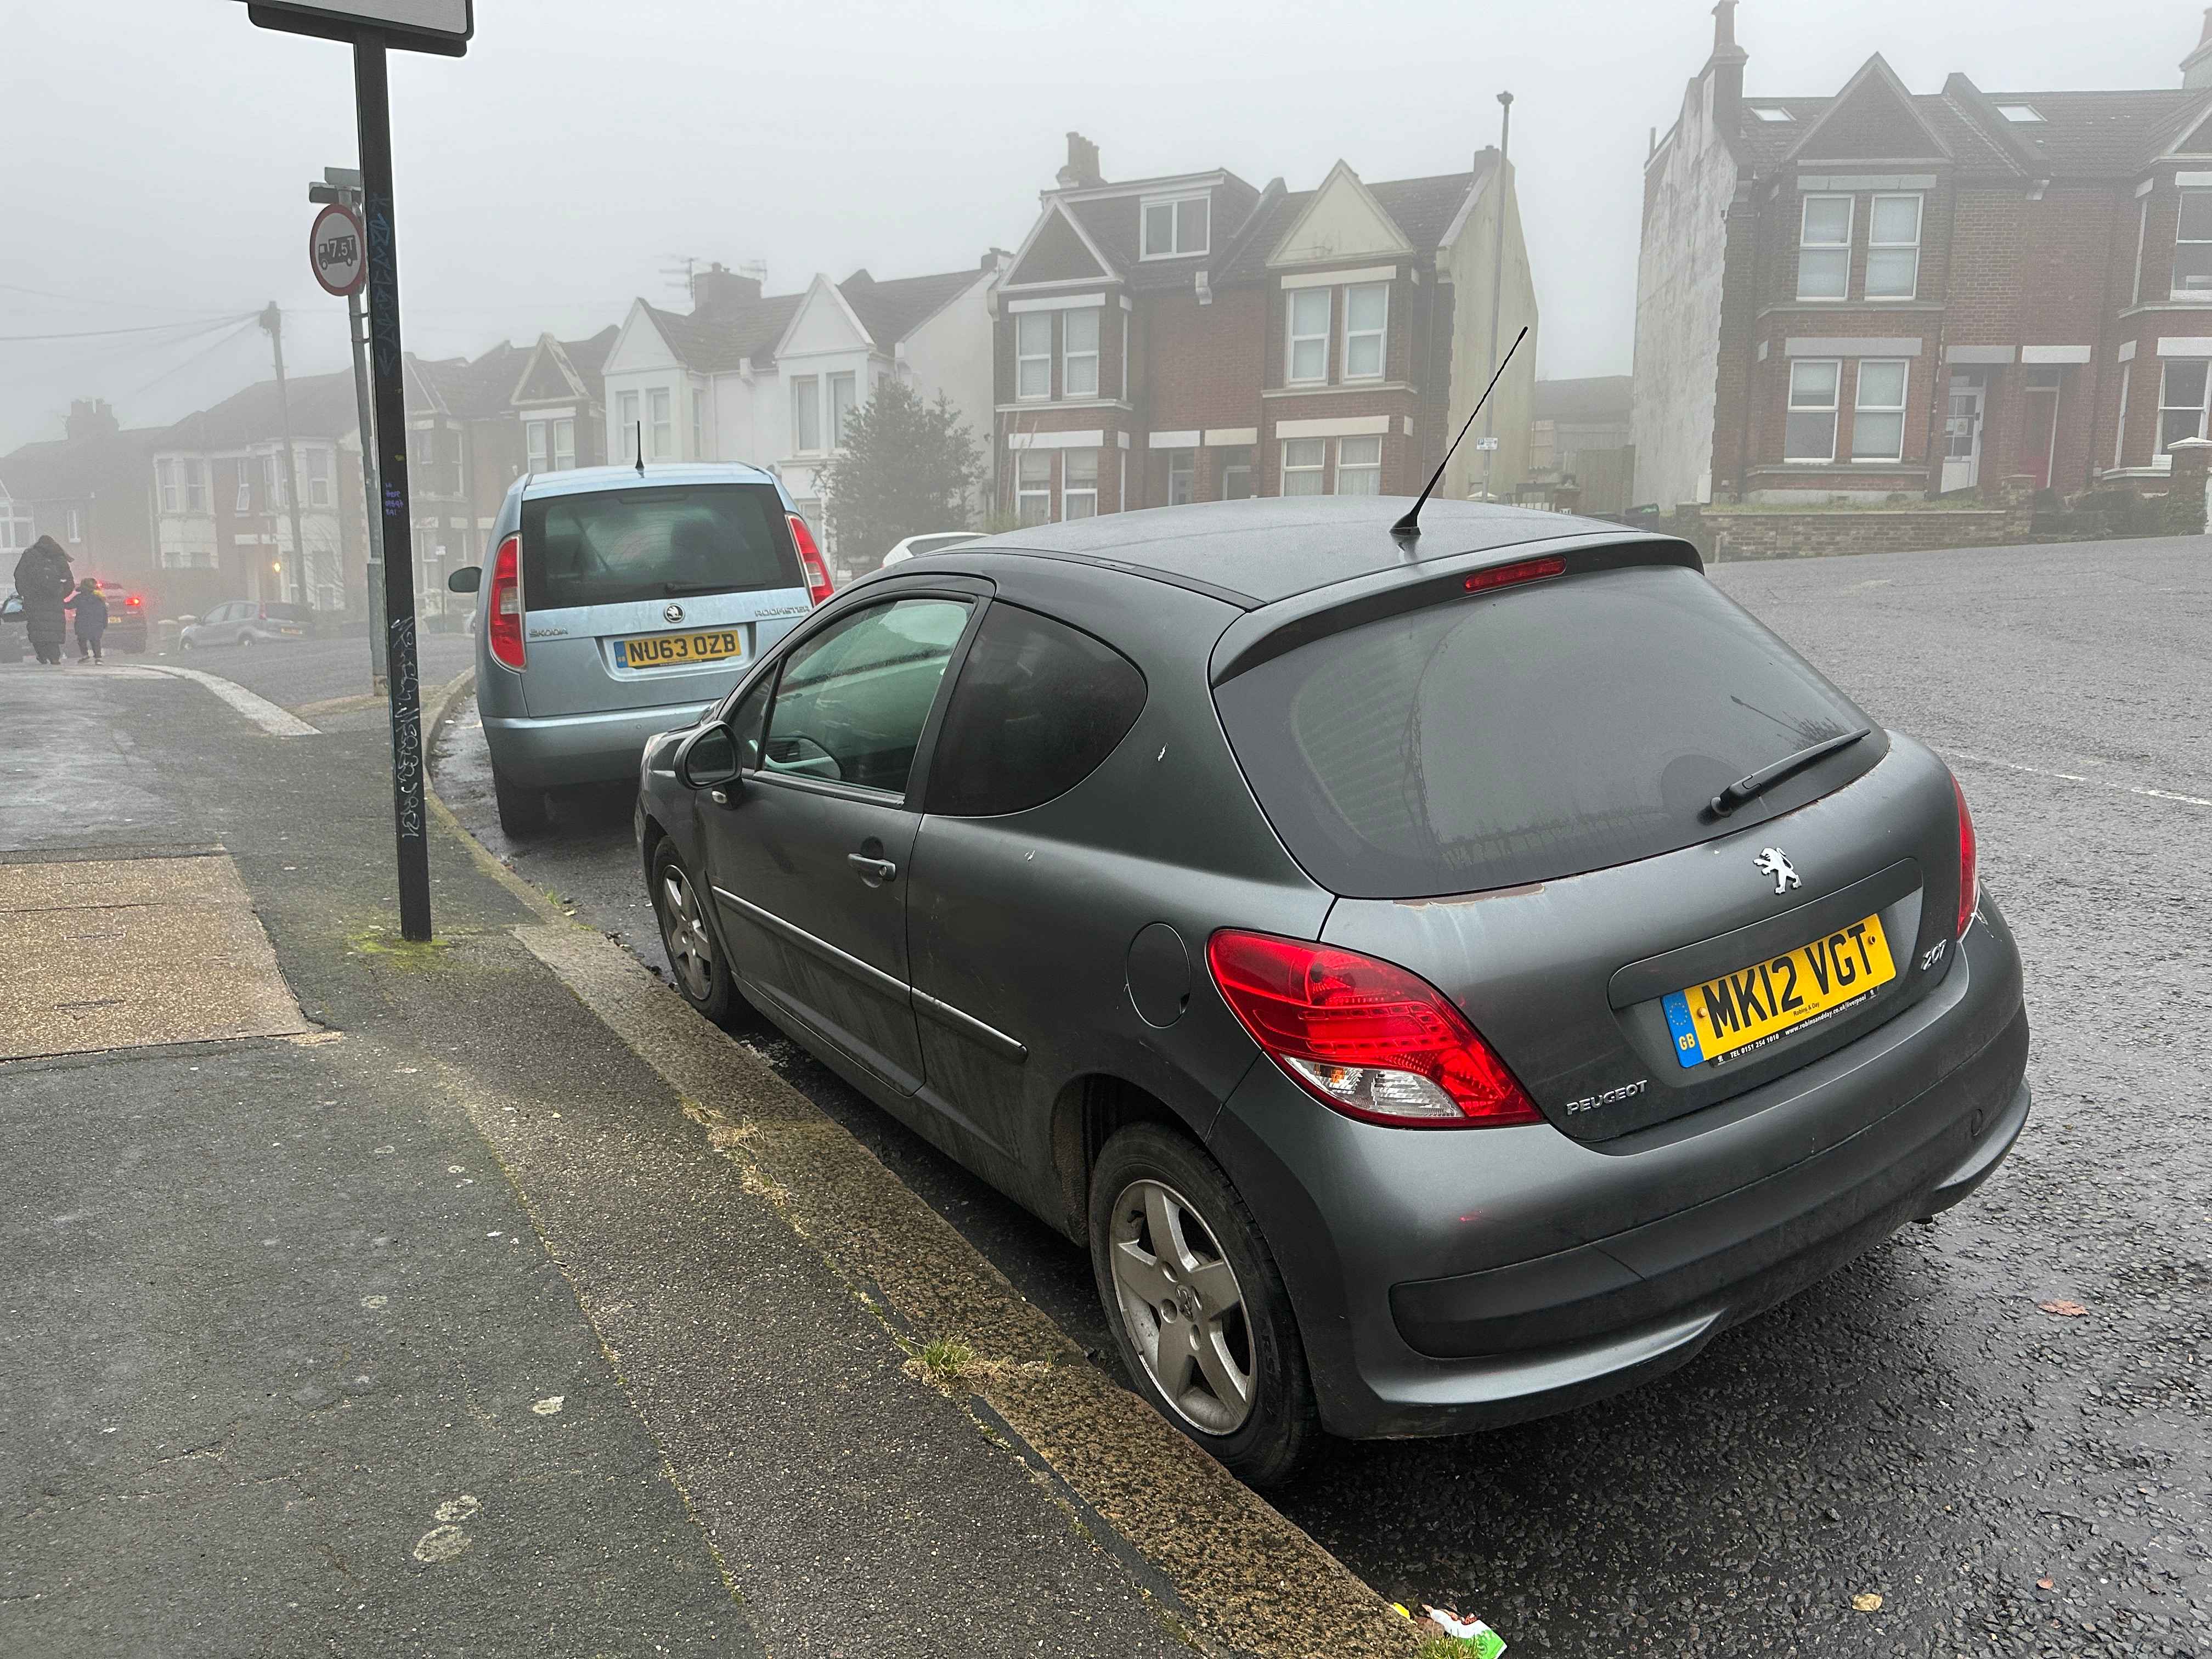 Photograph of MK12 VGT - a Grey Peugeot 207 parked in Hollingdean by a non-resident who uses the local area as part of their Brighton commute. The fifth of six photographs supplied by the residents of Hollingdean.